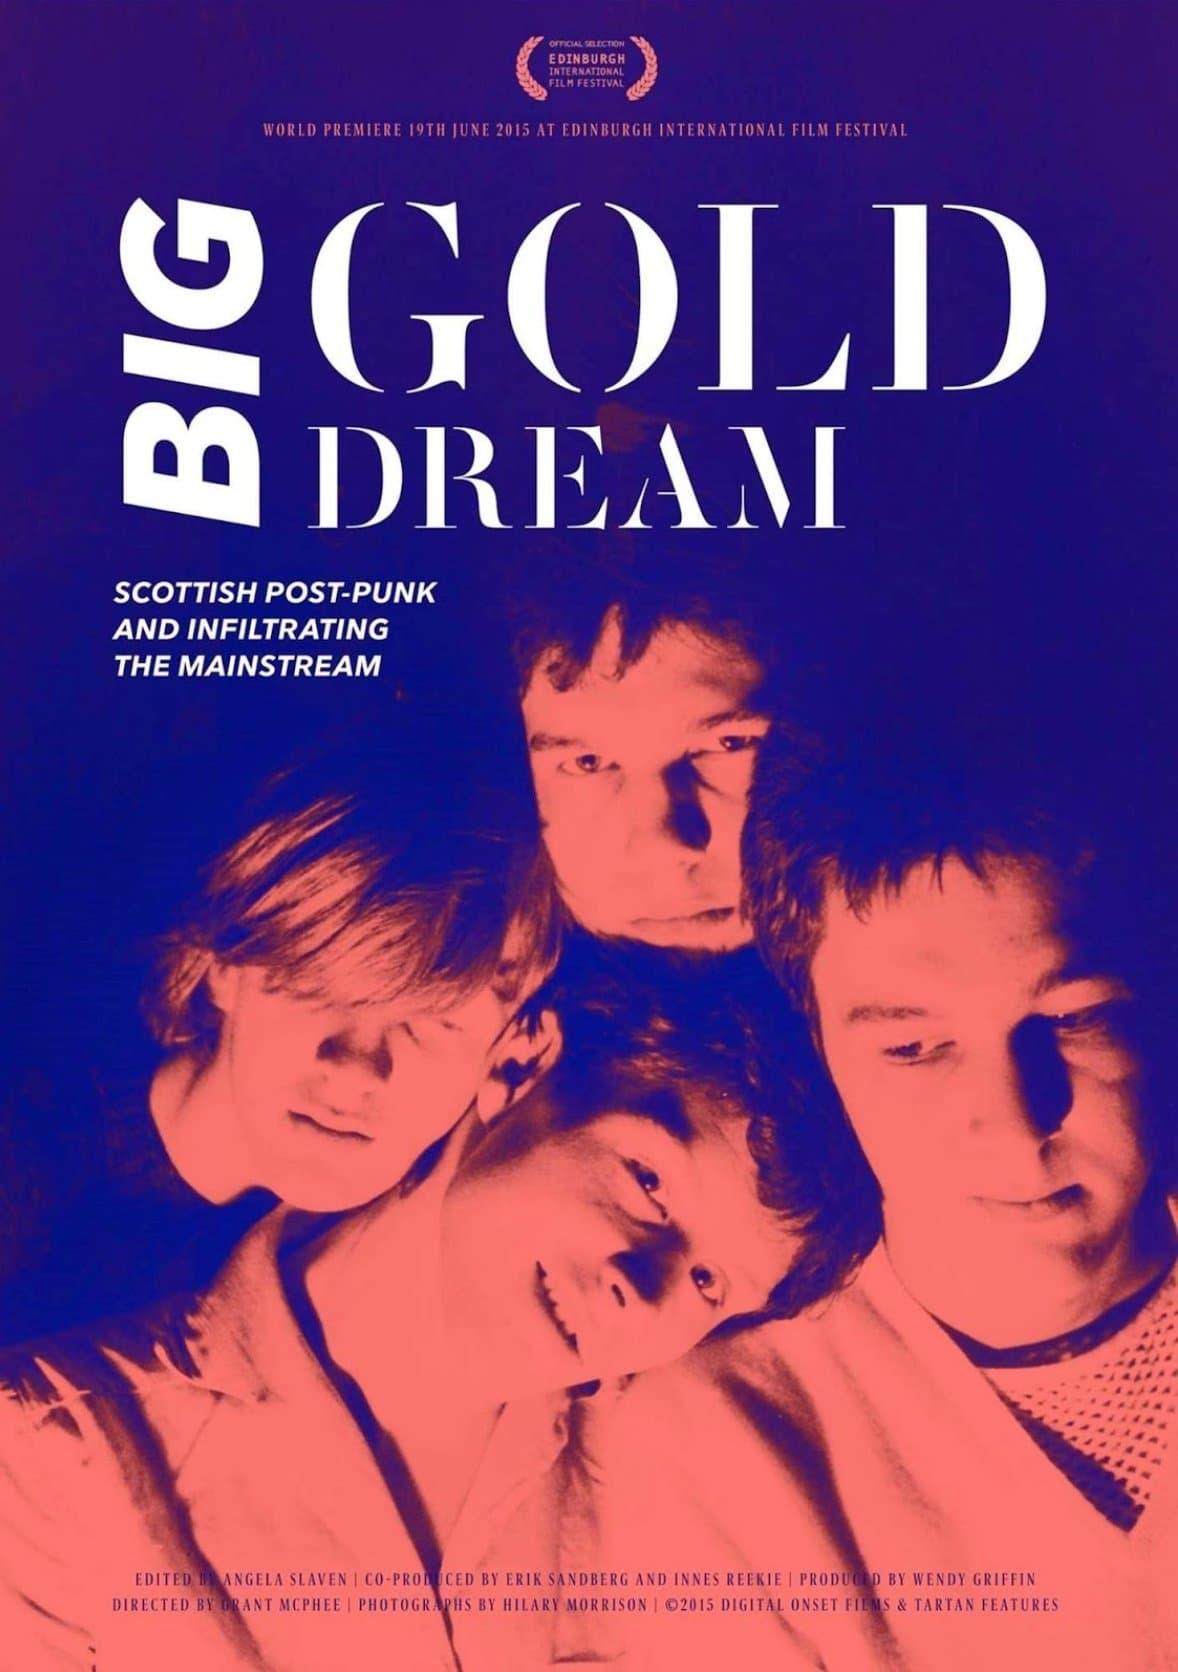 Big Gold Dream: Scottish Post-Punk and Infiltrating the Mainstream poster